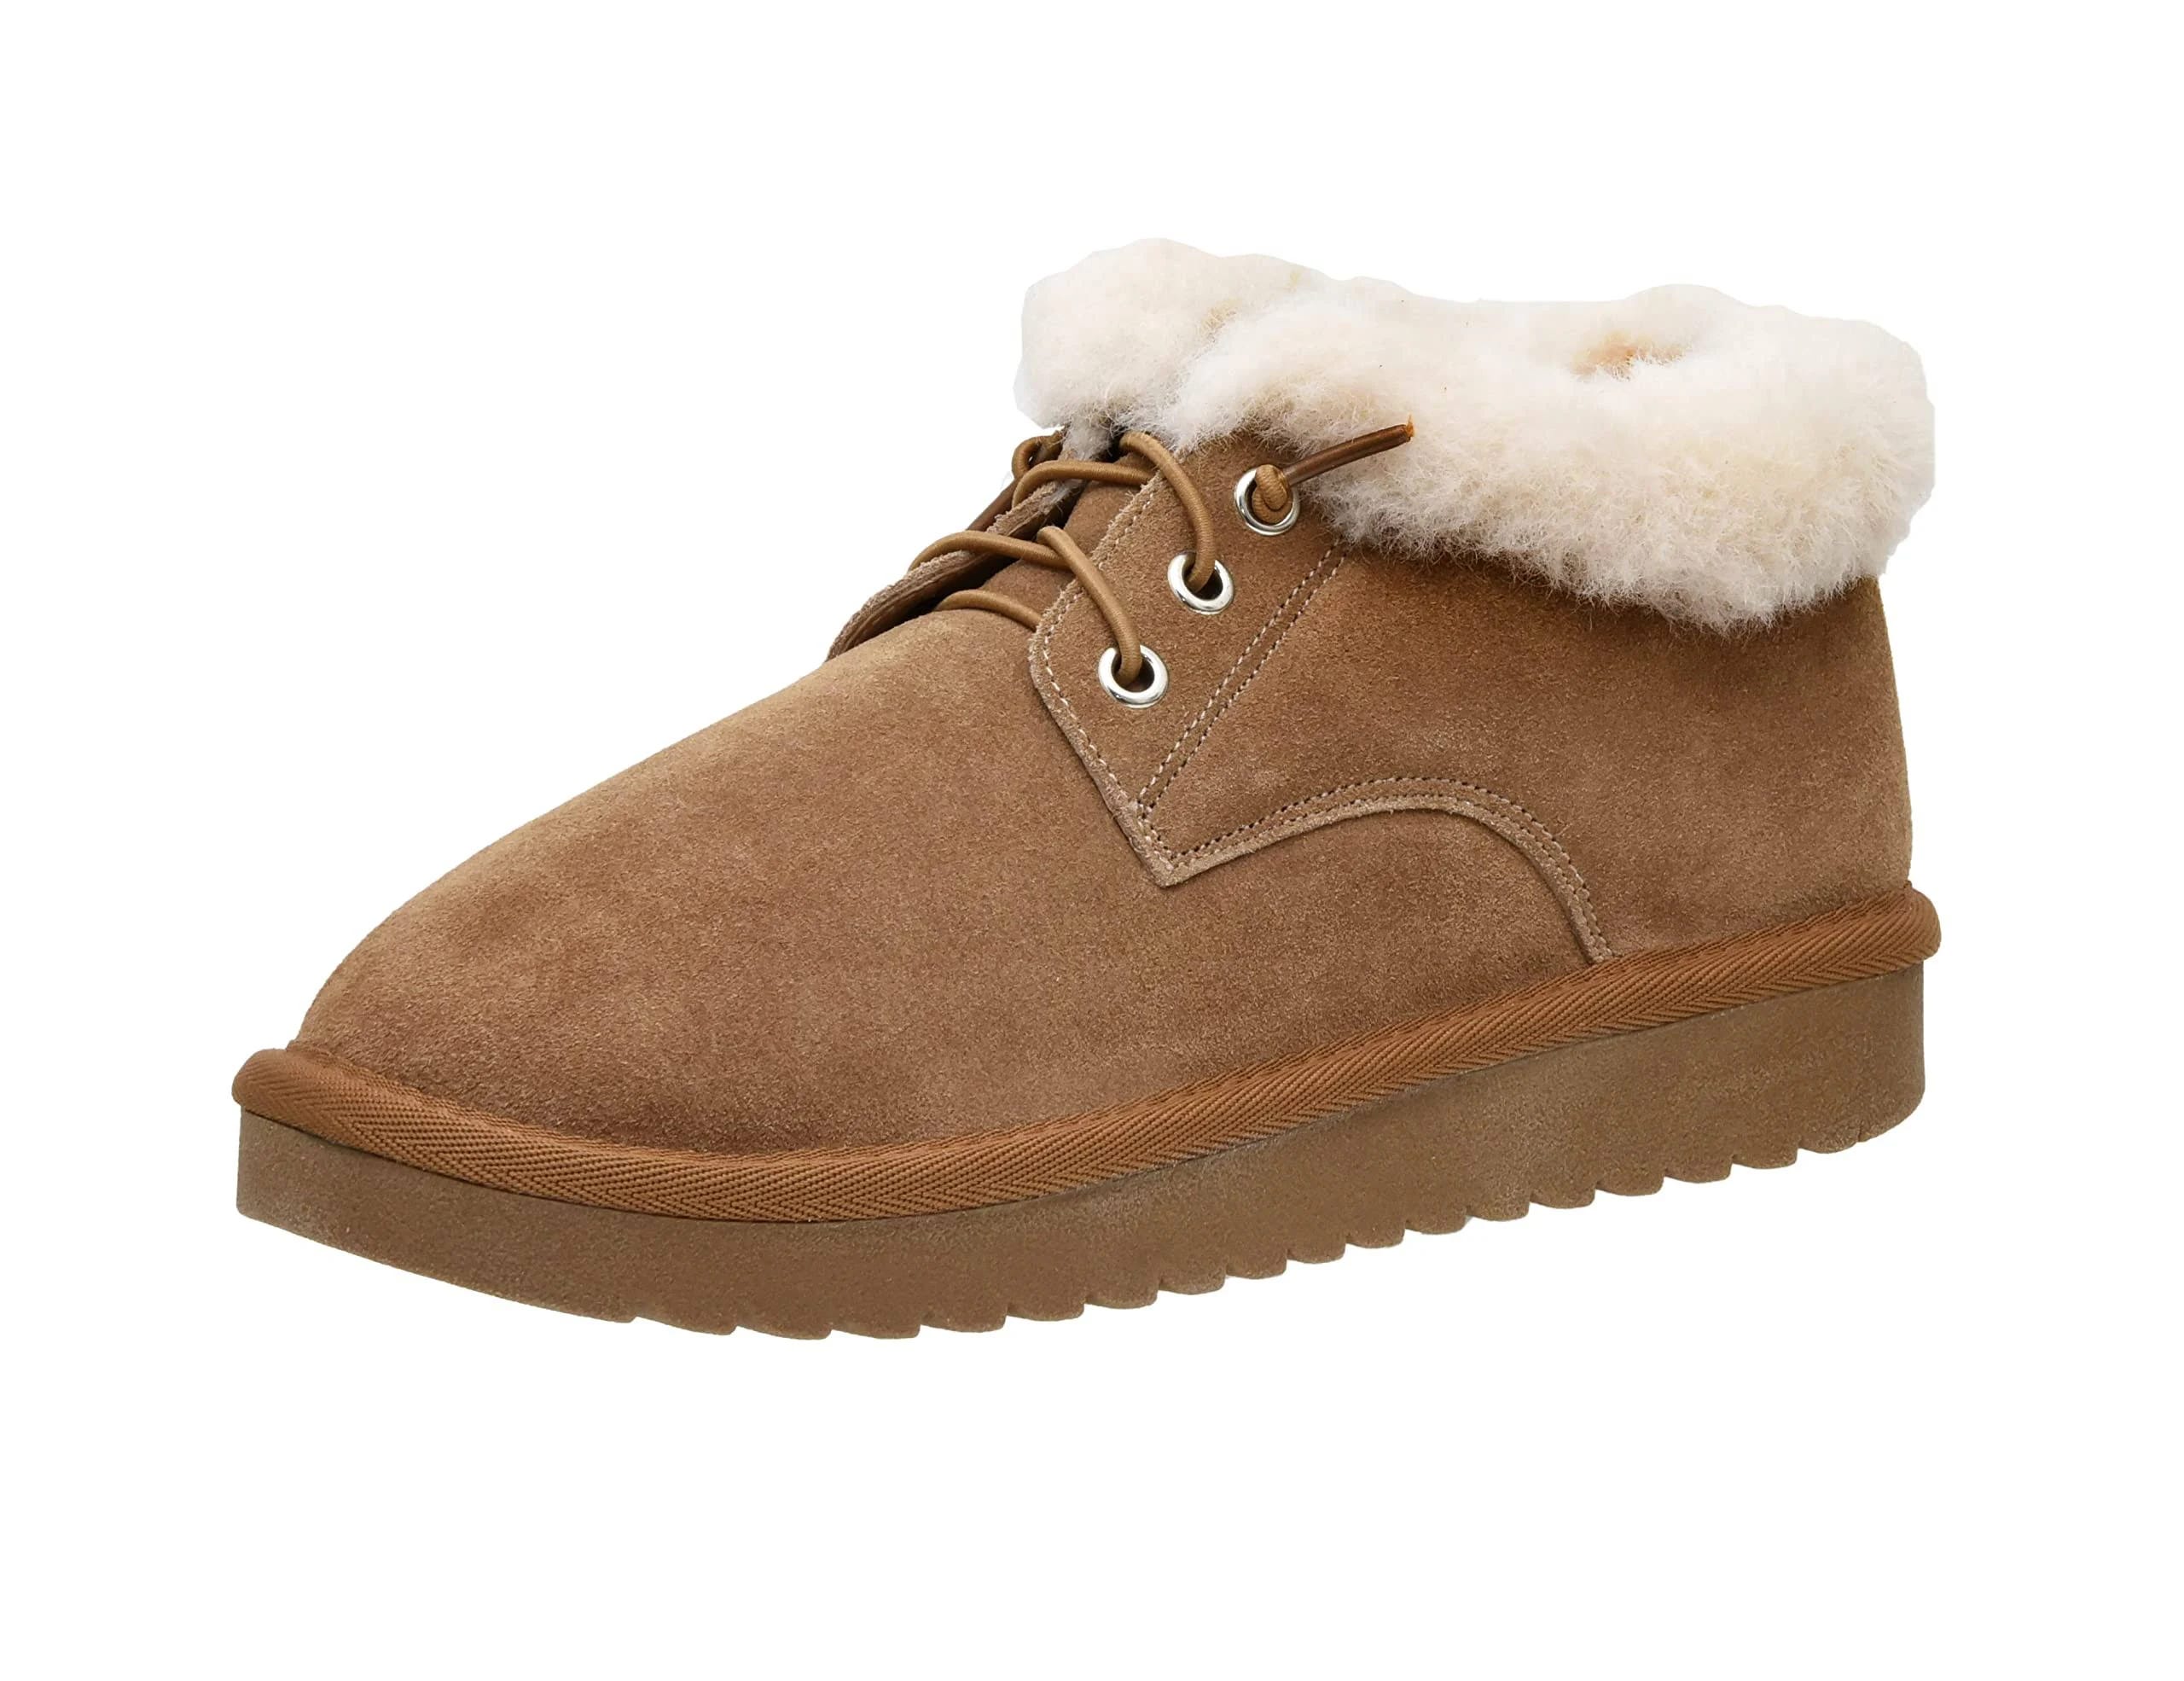 Cozy Suede Pull-on Boot with Memory Foam Insoles | Image